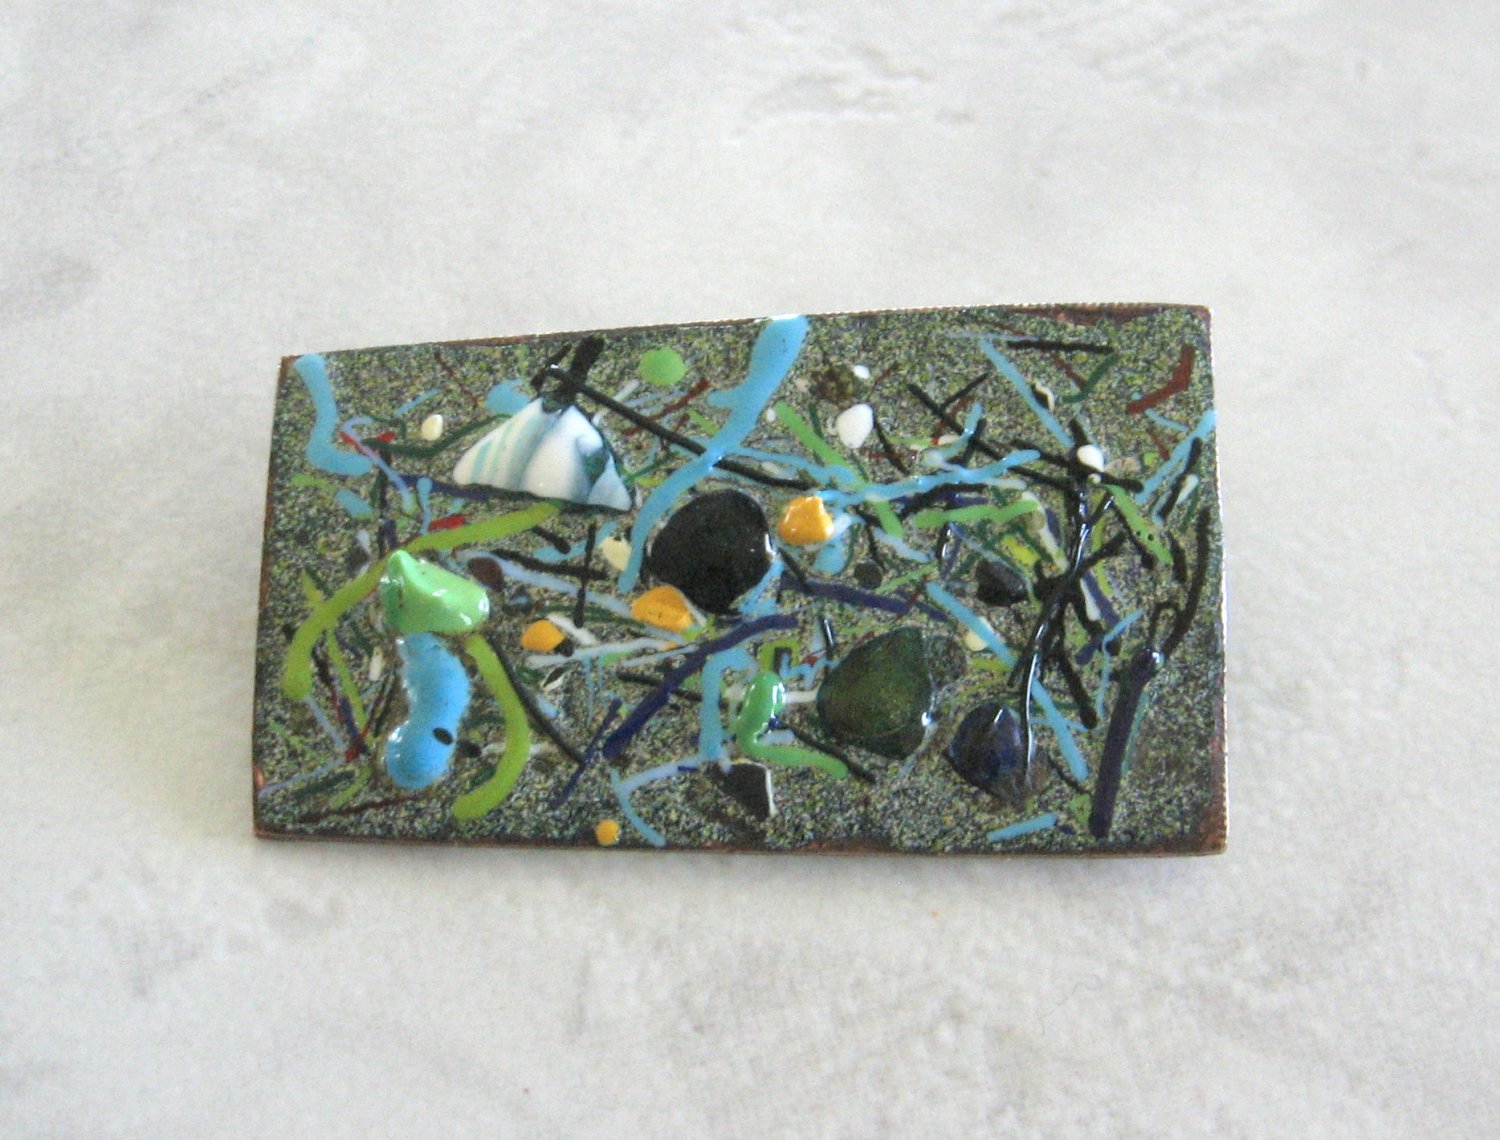 Hand Crafted Unusual Abstract Metal Enamel Painted Glass Brooch Pin Vintage Jewelry 1960s